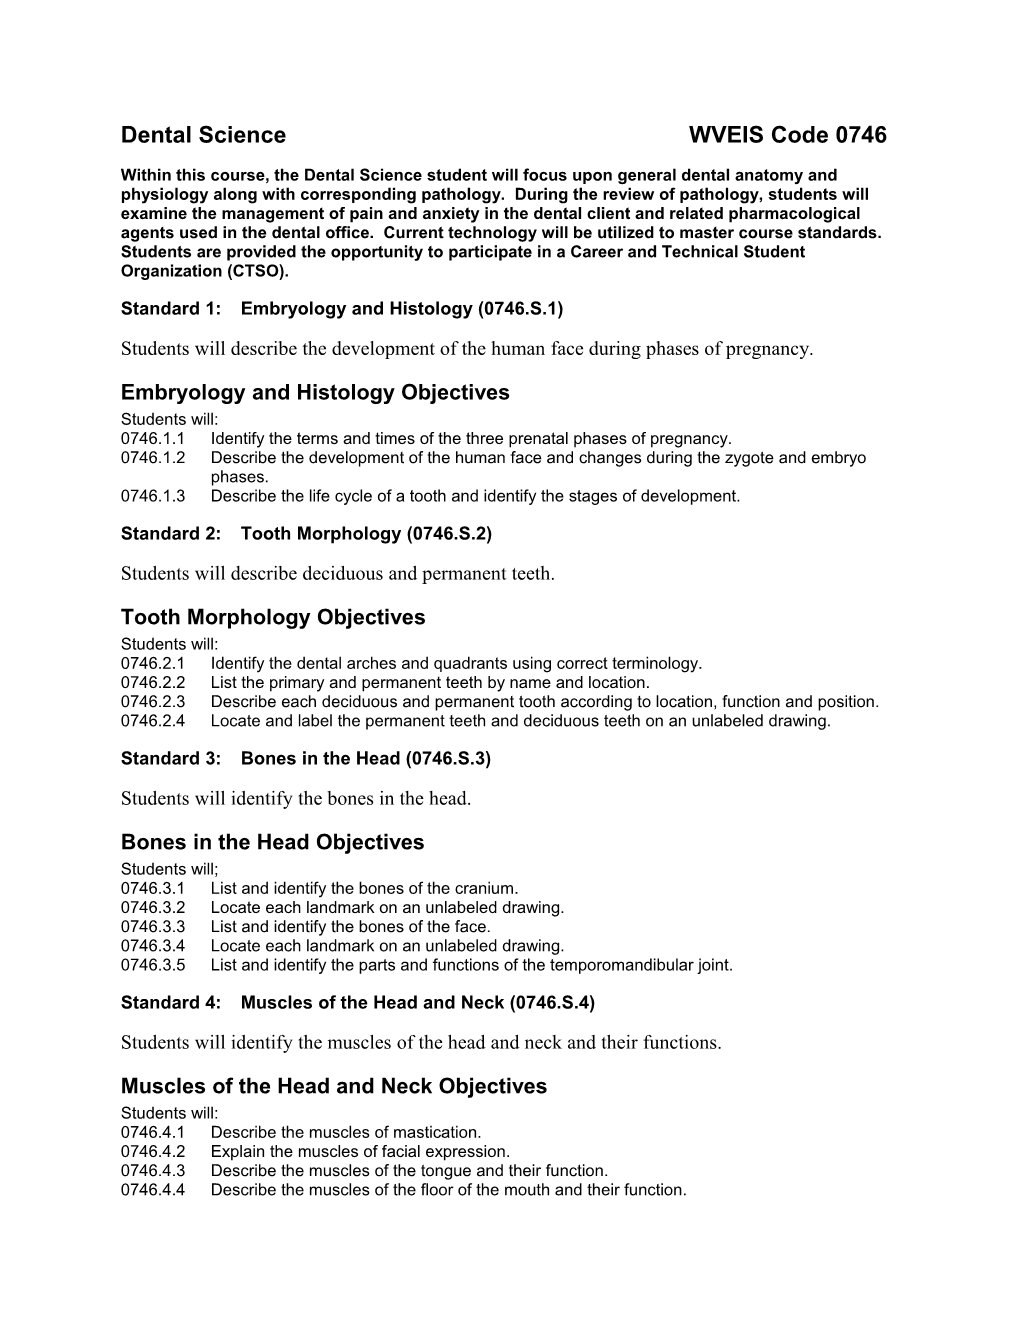 Standard 1:Embryology and Histology (0746.S.1)